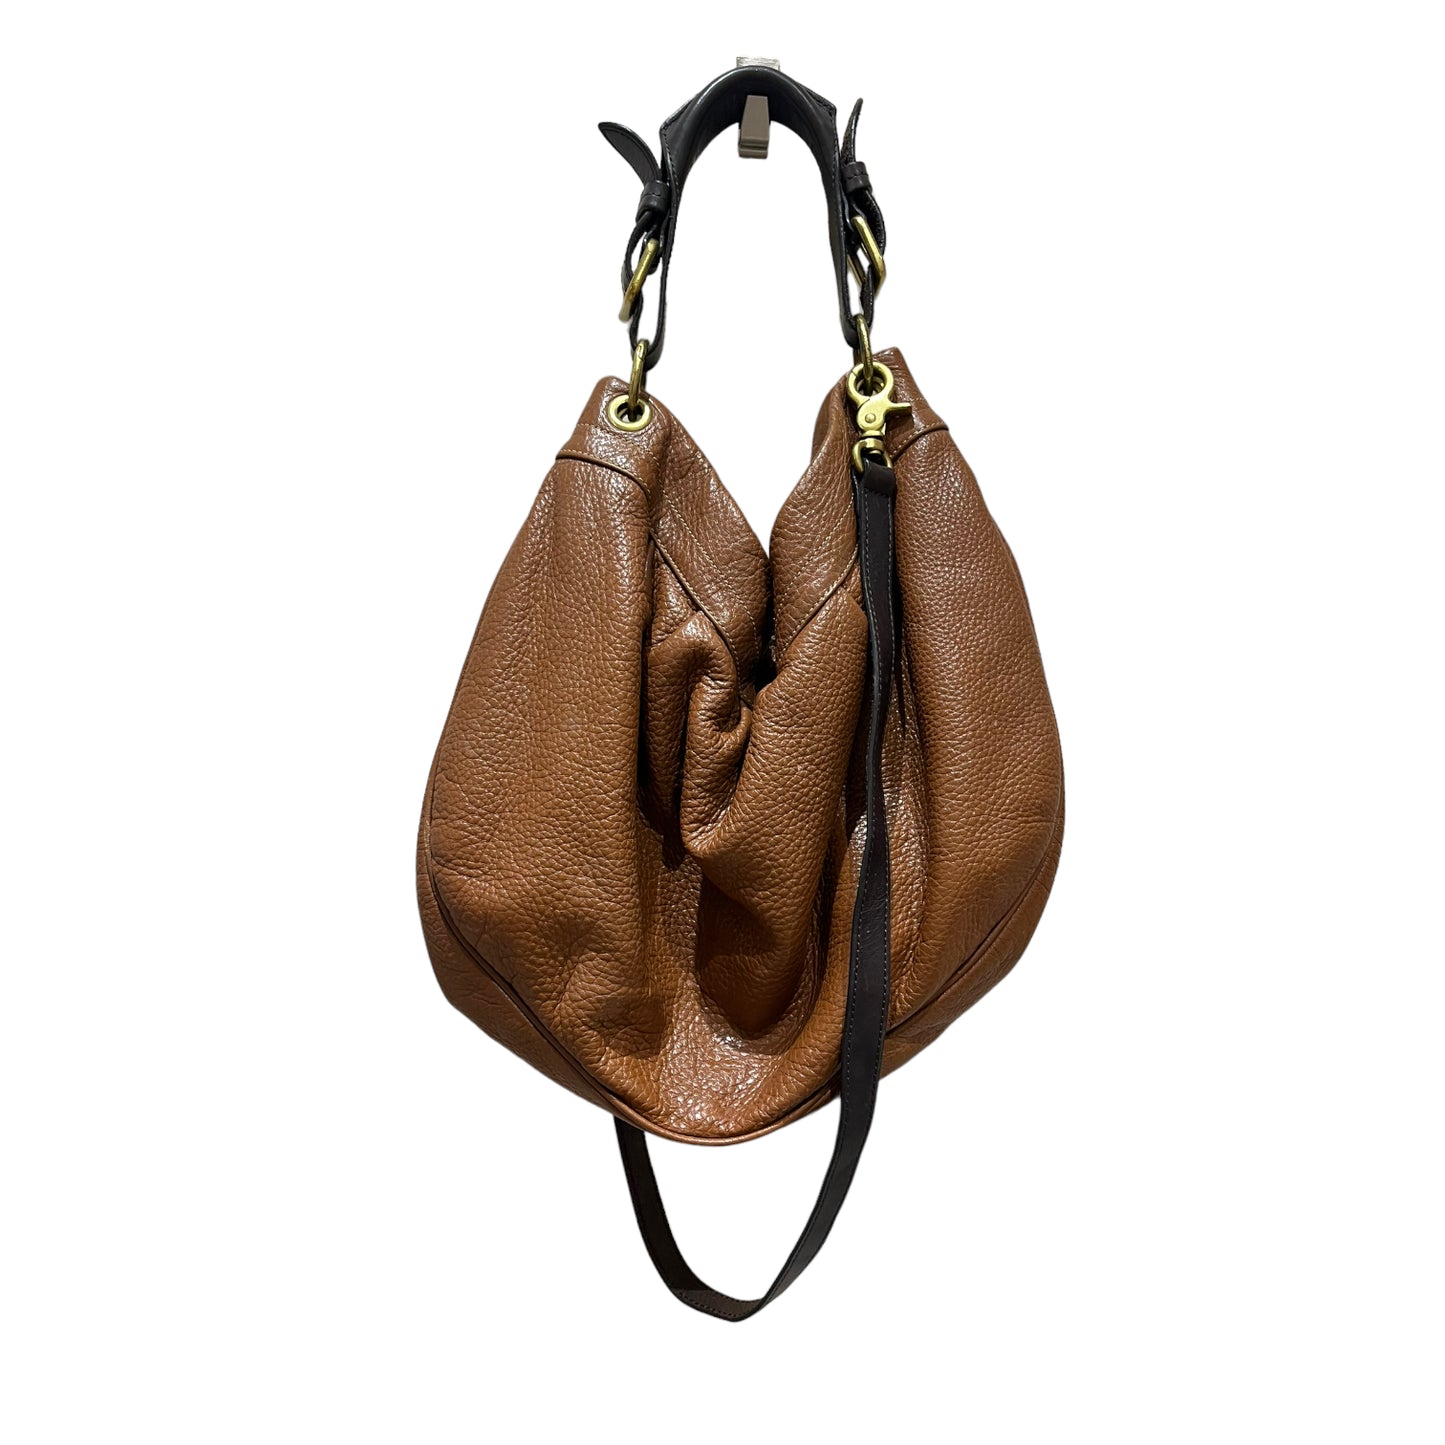 Mulberry Mitzy Tan Leather Bag